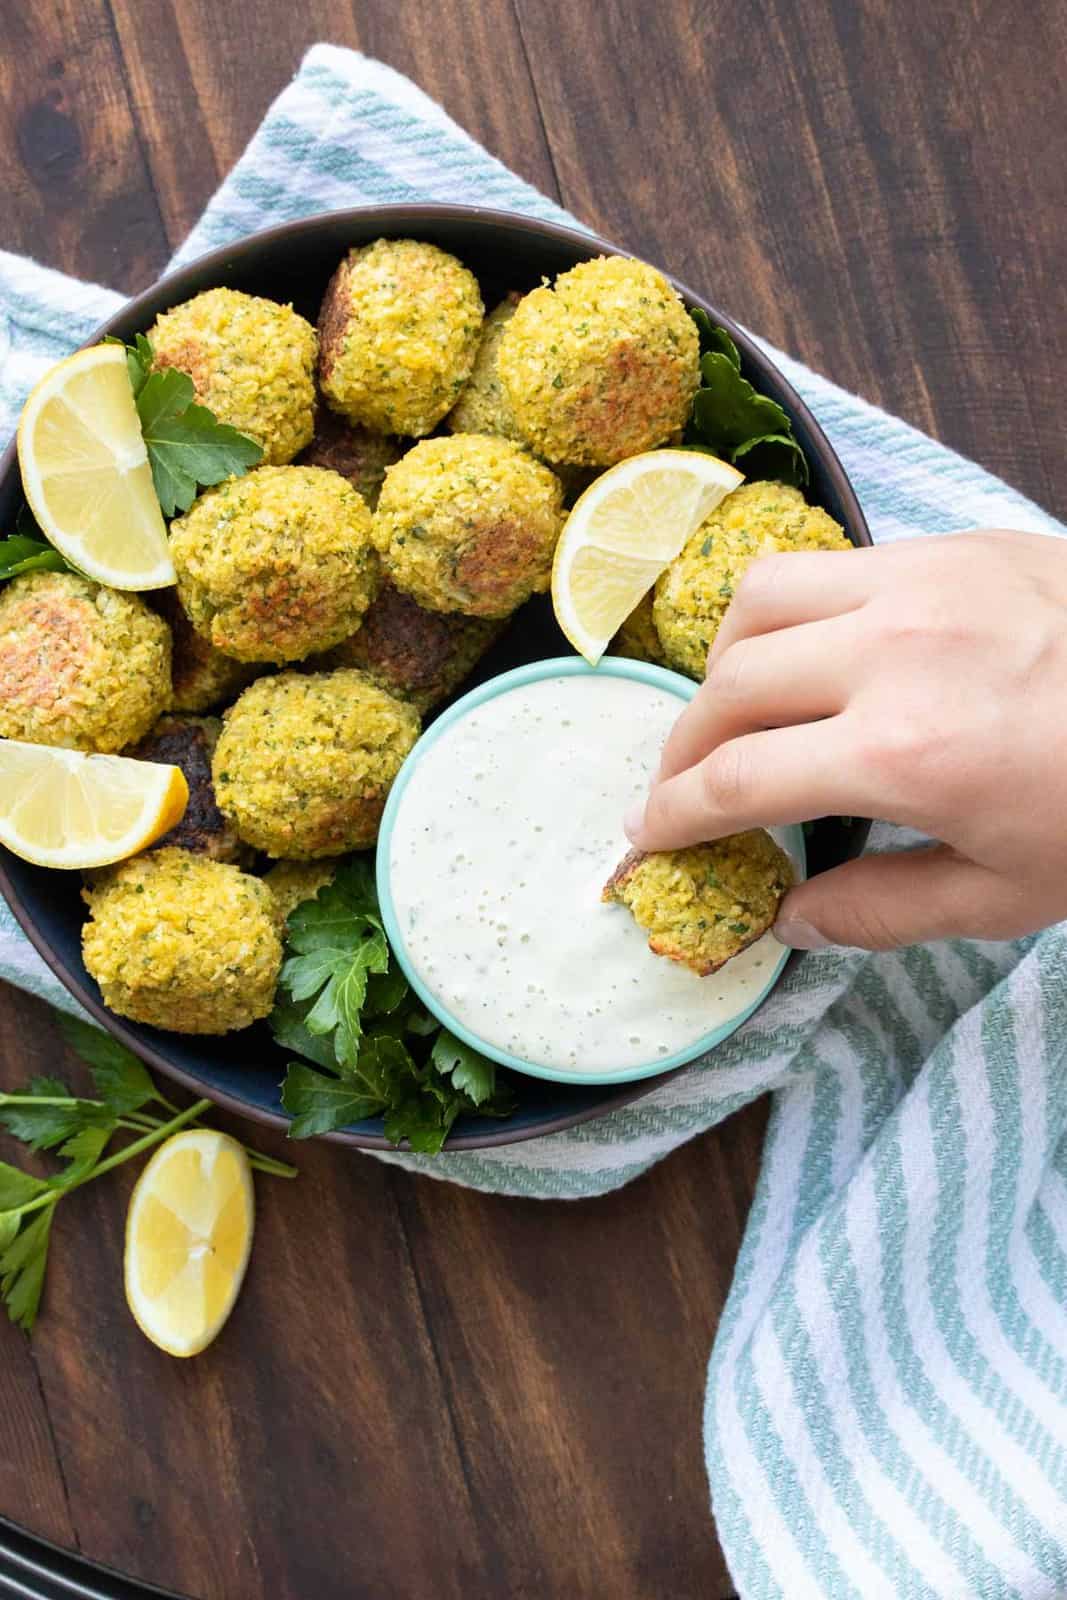 Falafel being dipped into a bowl of tahini sauce